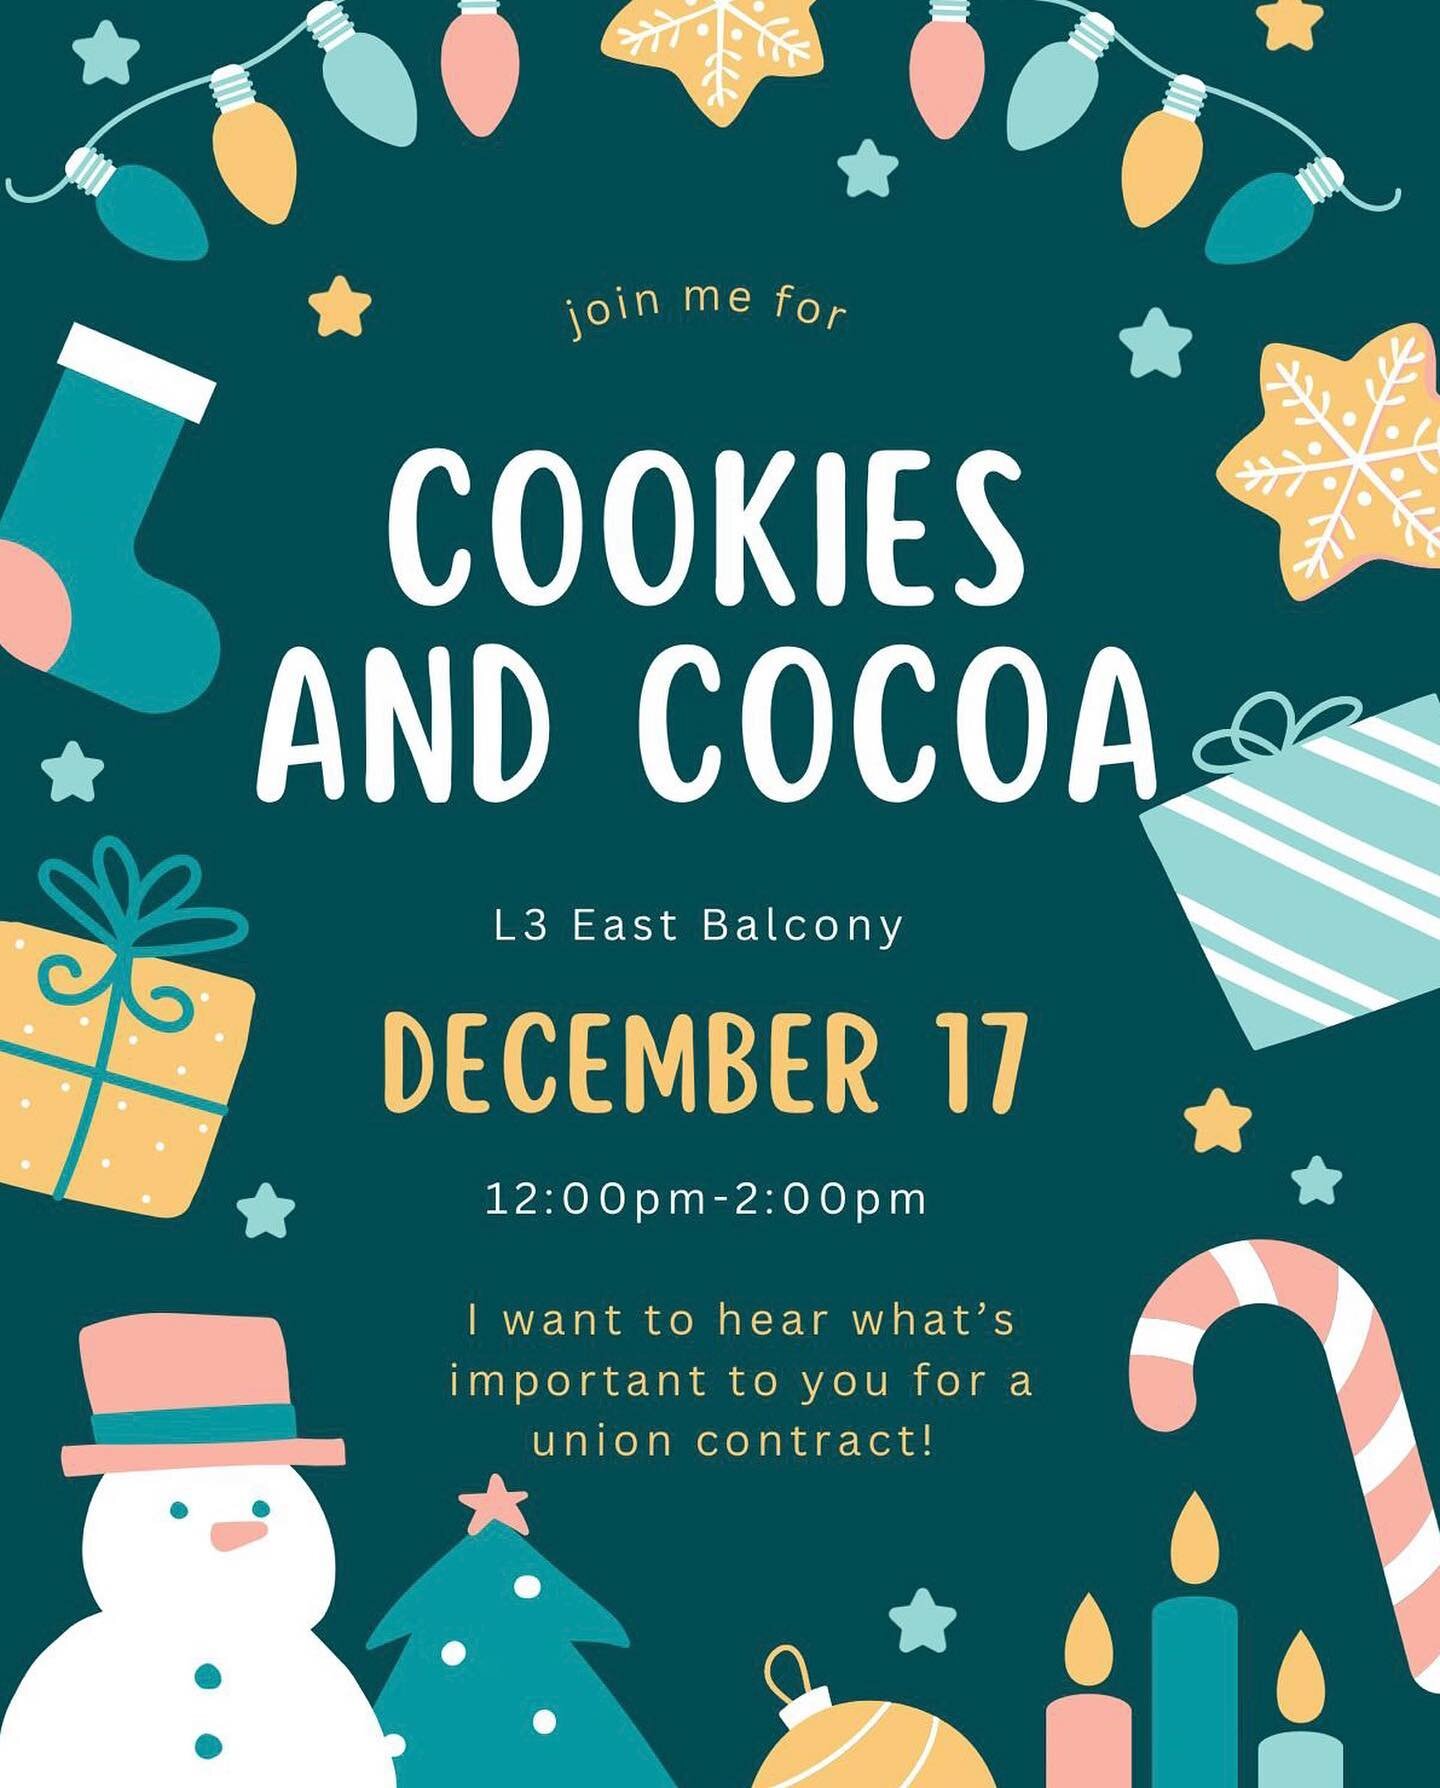 🍪GUEST EXPERIENCE SOCIAL🍪

Current and former GE associates are invited to join us on the L3E balcony this Sunday 12/17 at 12pm-2pm for cookies, cocoa, and contract chats. 

This is just to address GE&rsquo;s unique contract needs, but the bargaini